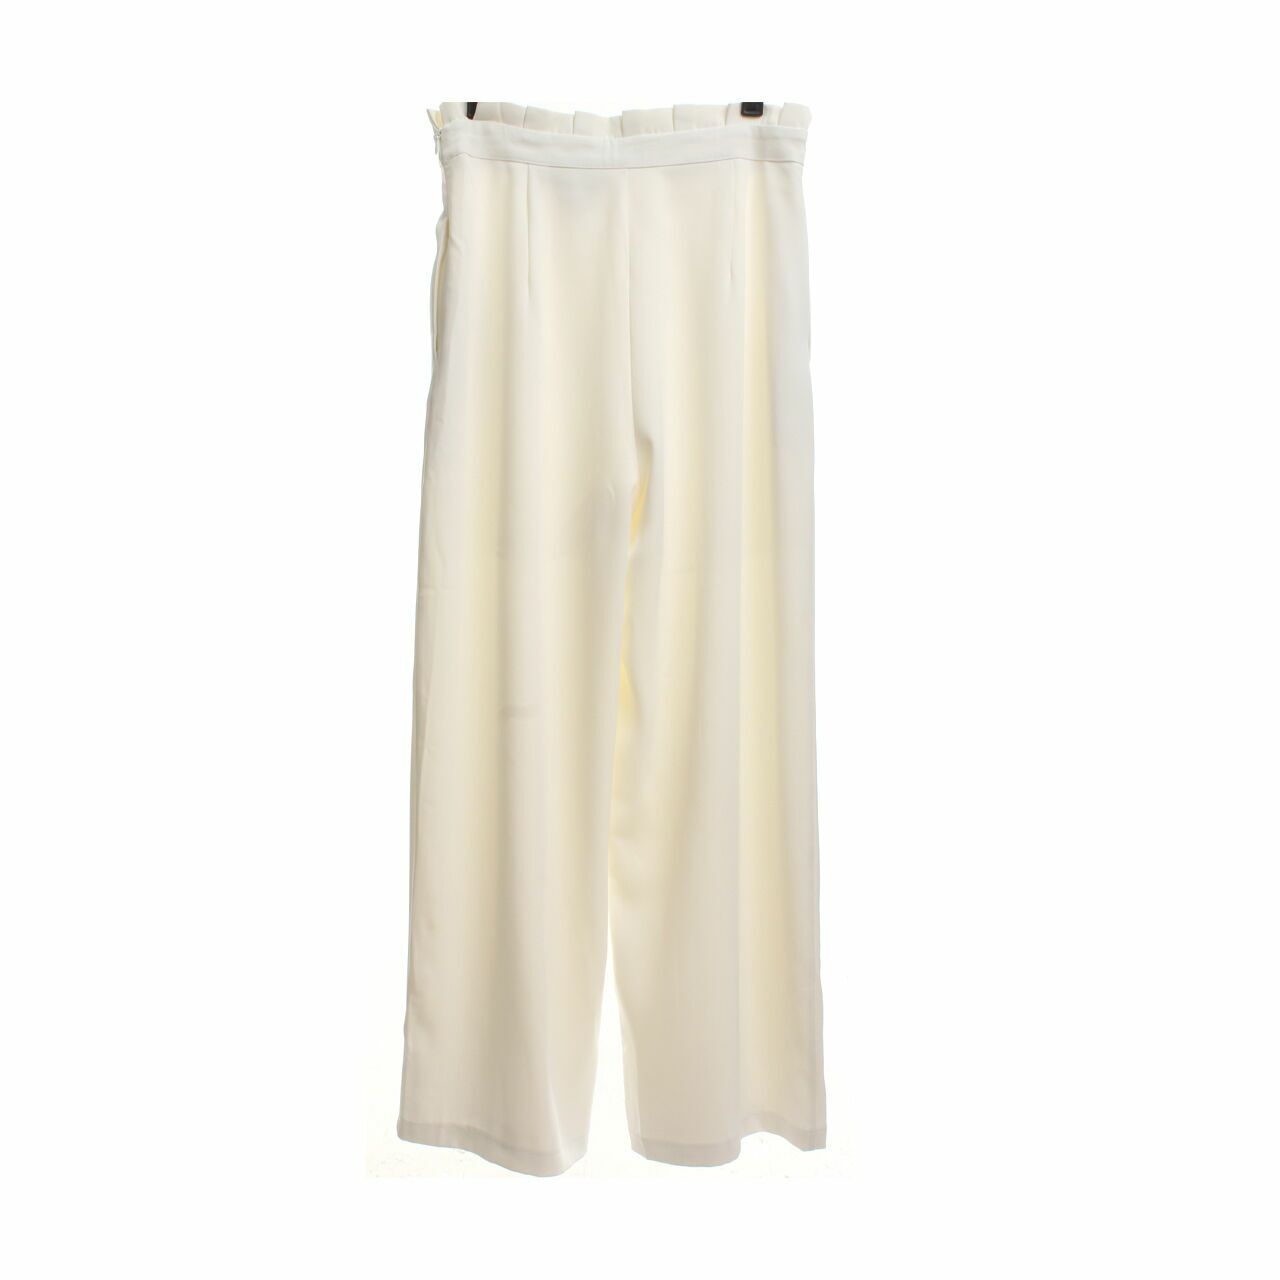 Chocochips White Long Pants Cullote